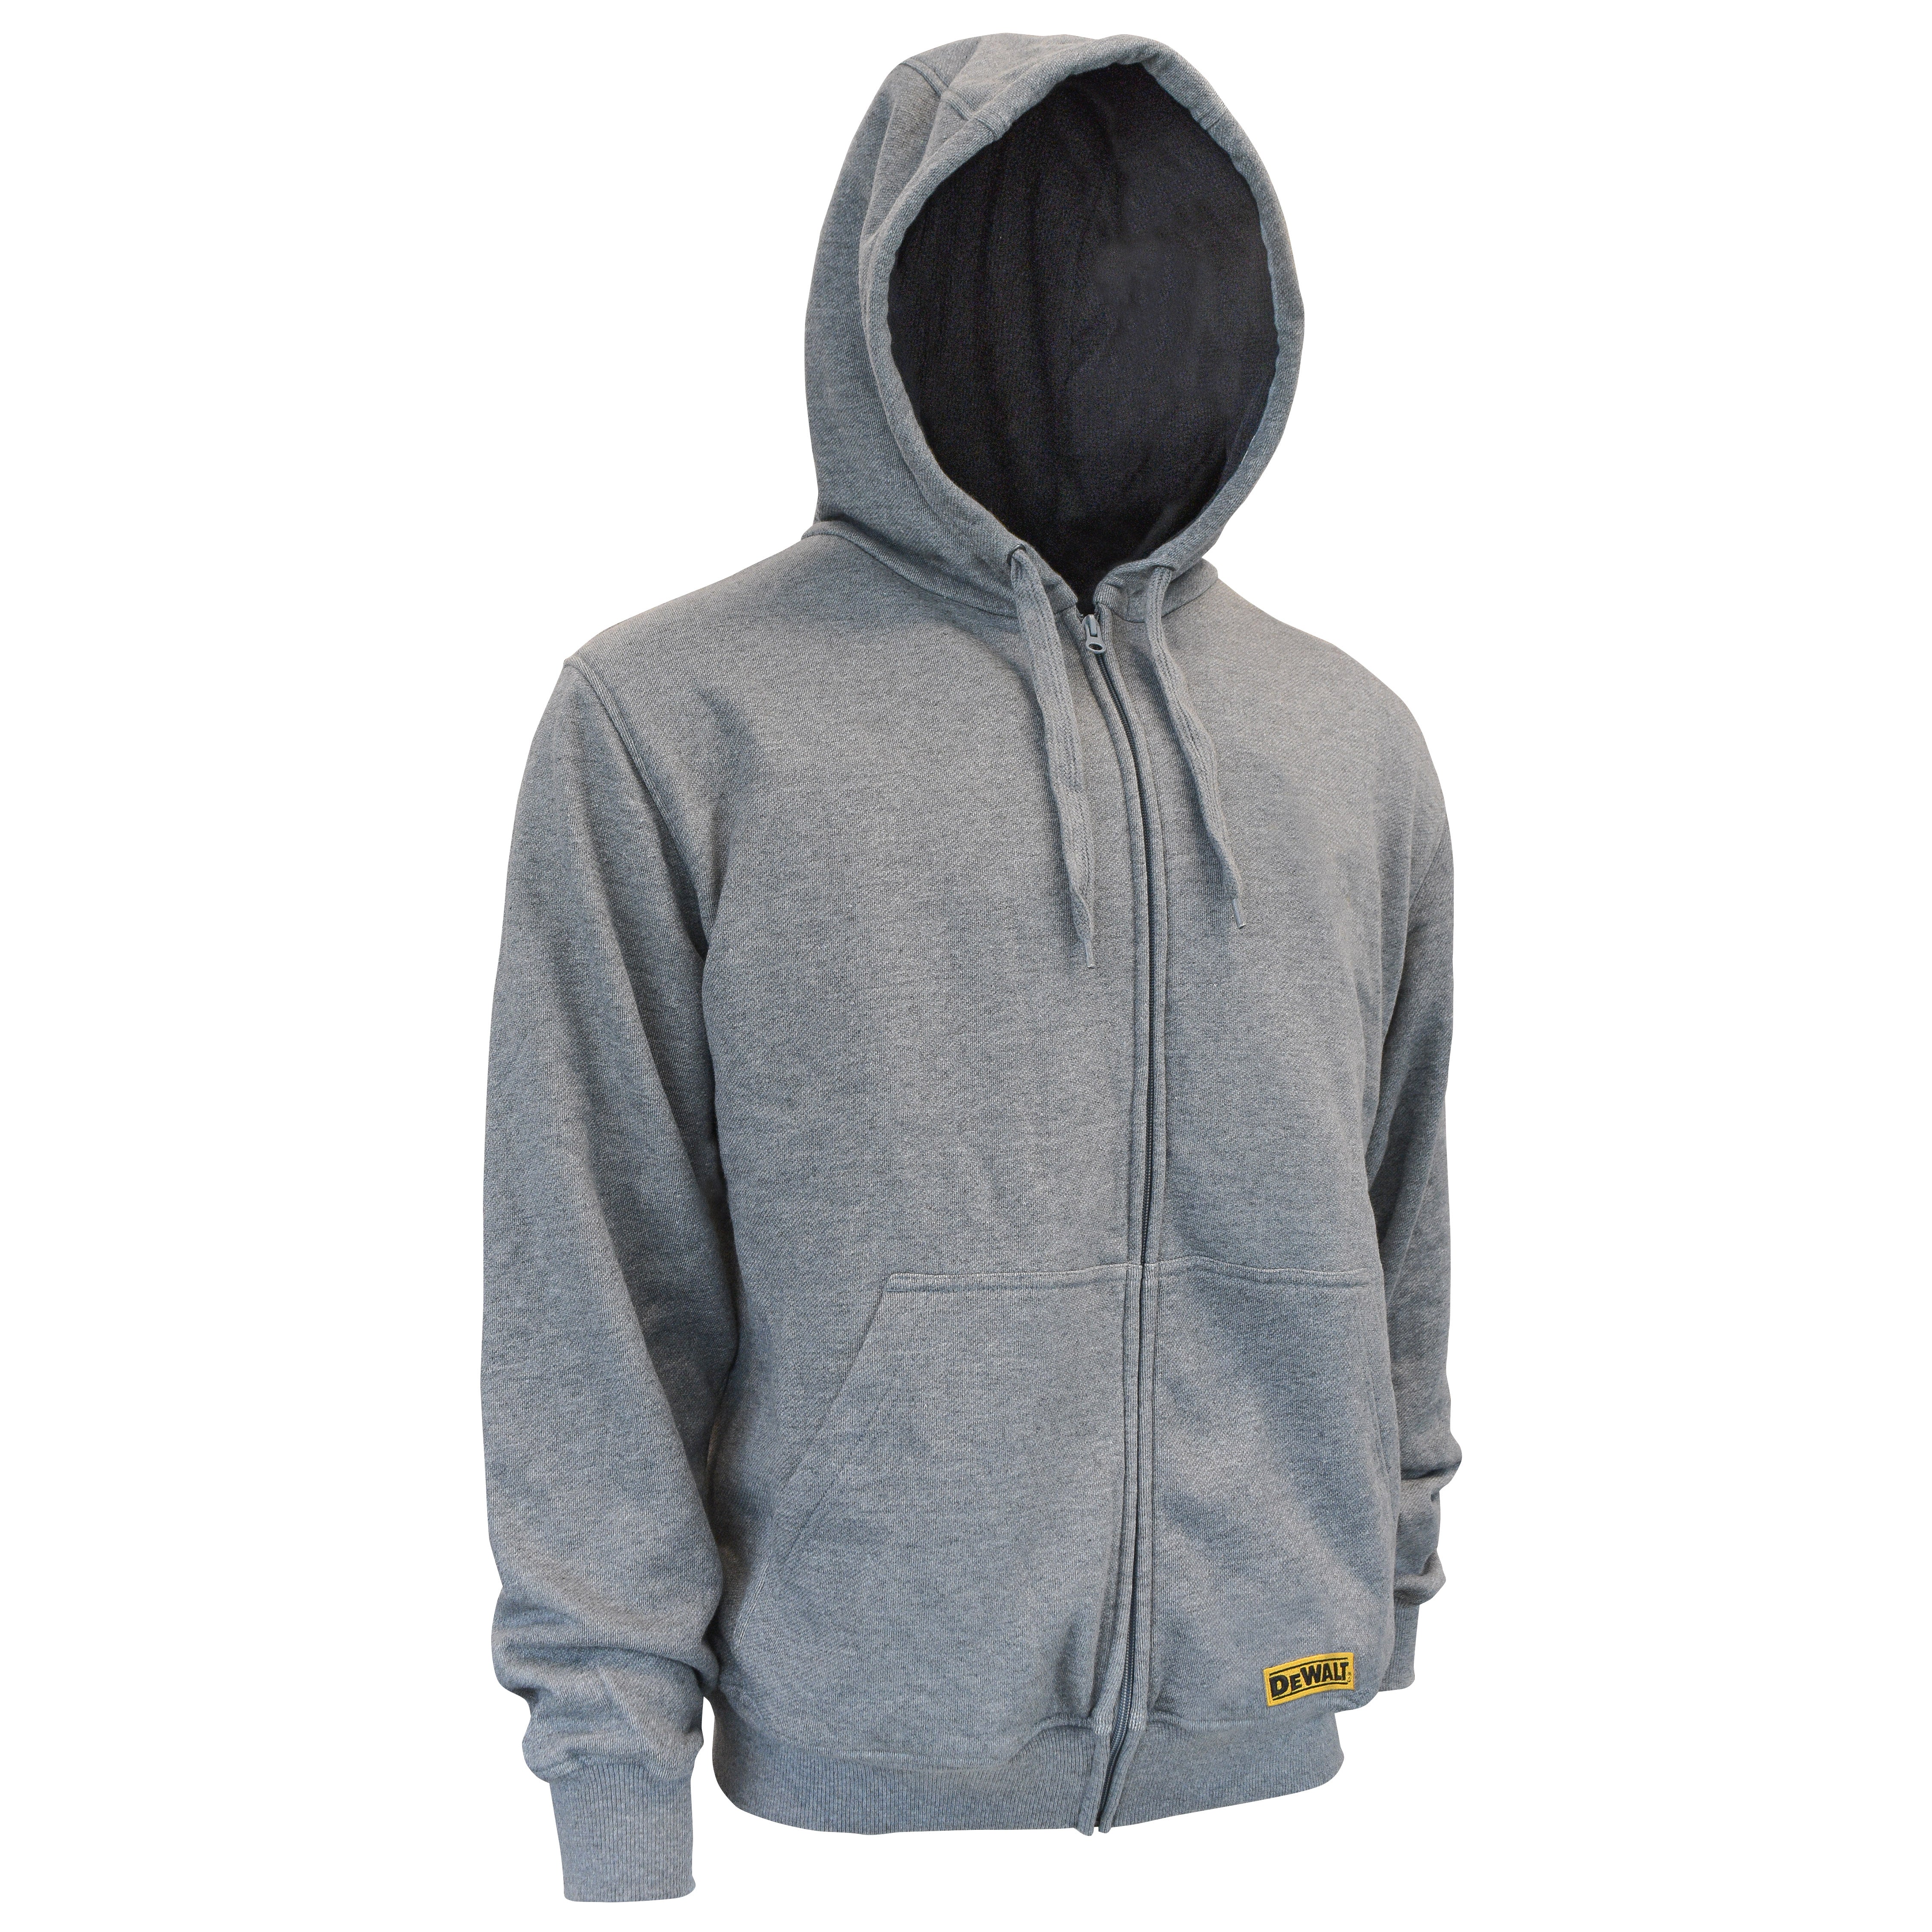 DEWALT Men's Heated French Terry Cotton Hoodie without Battery